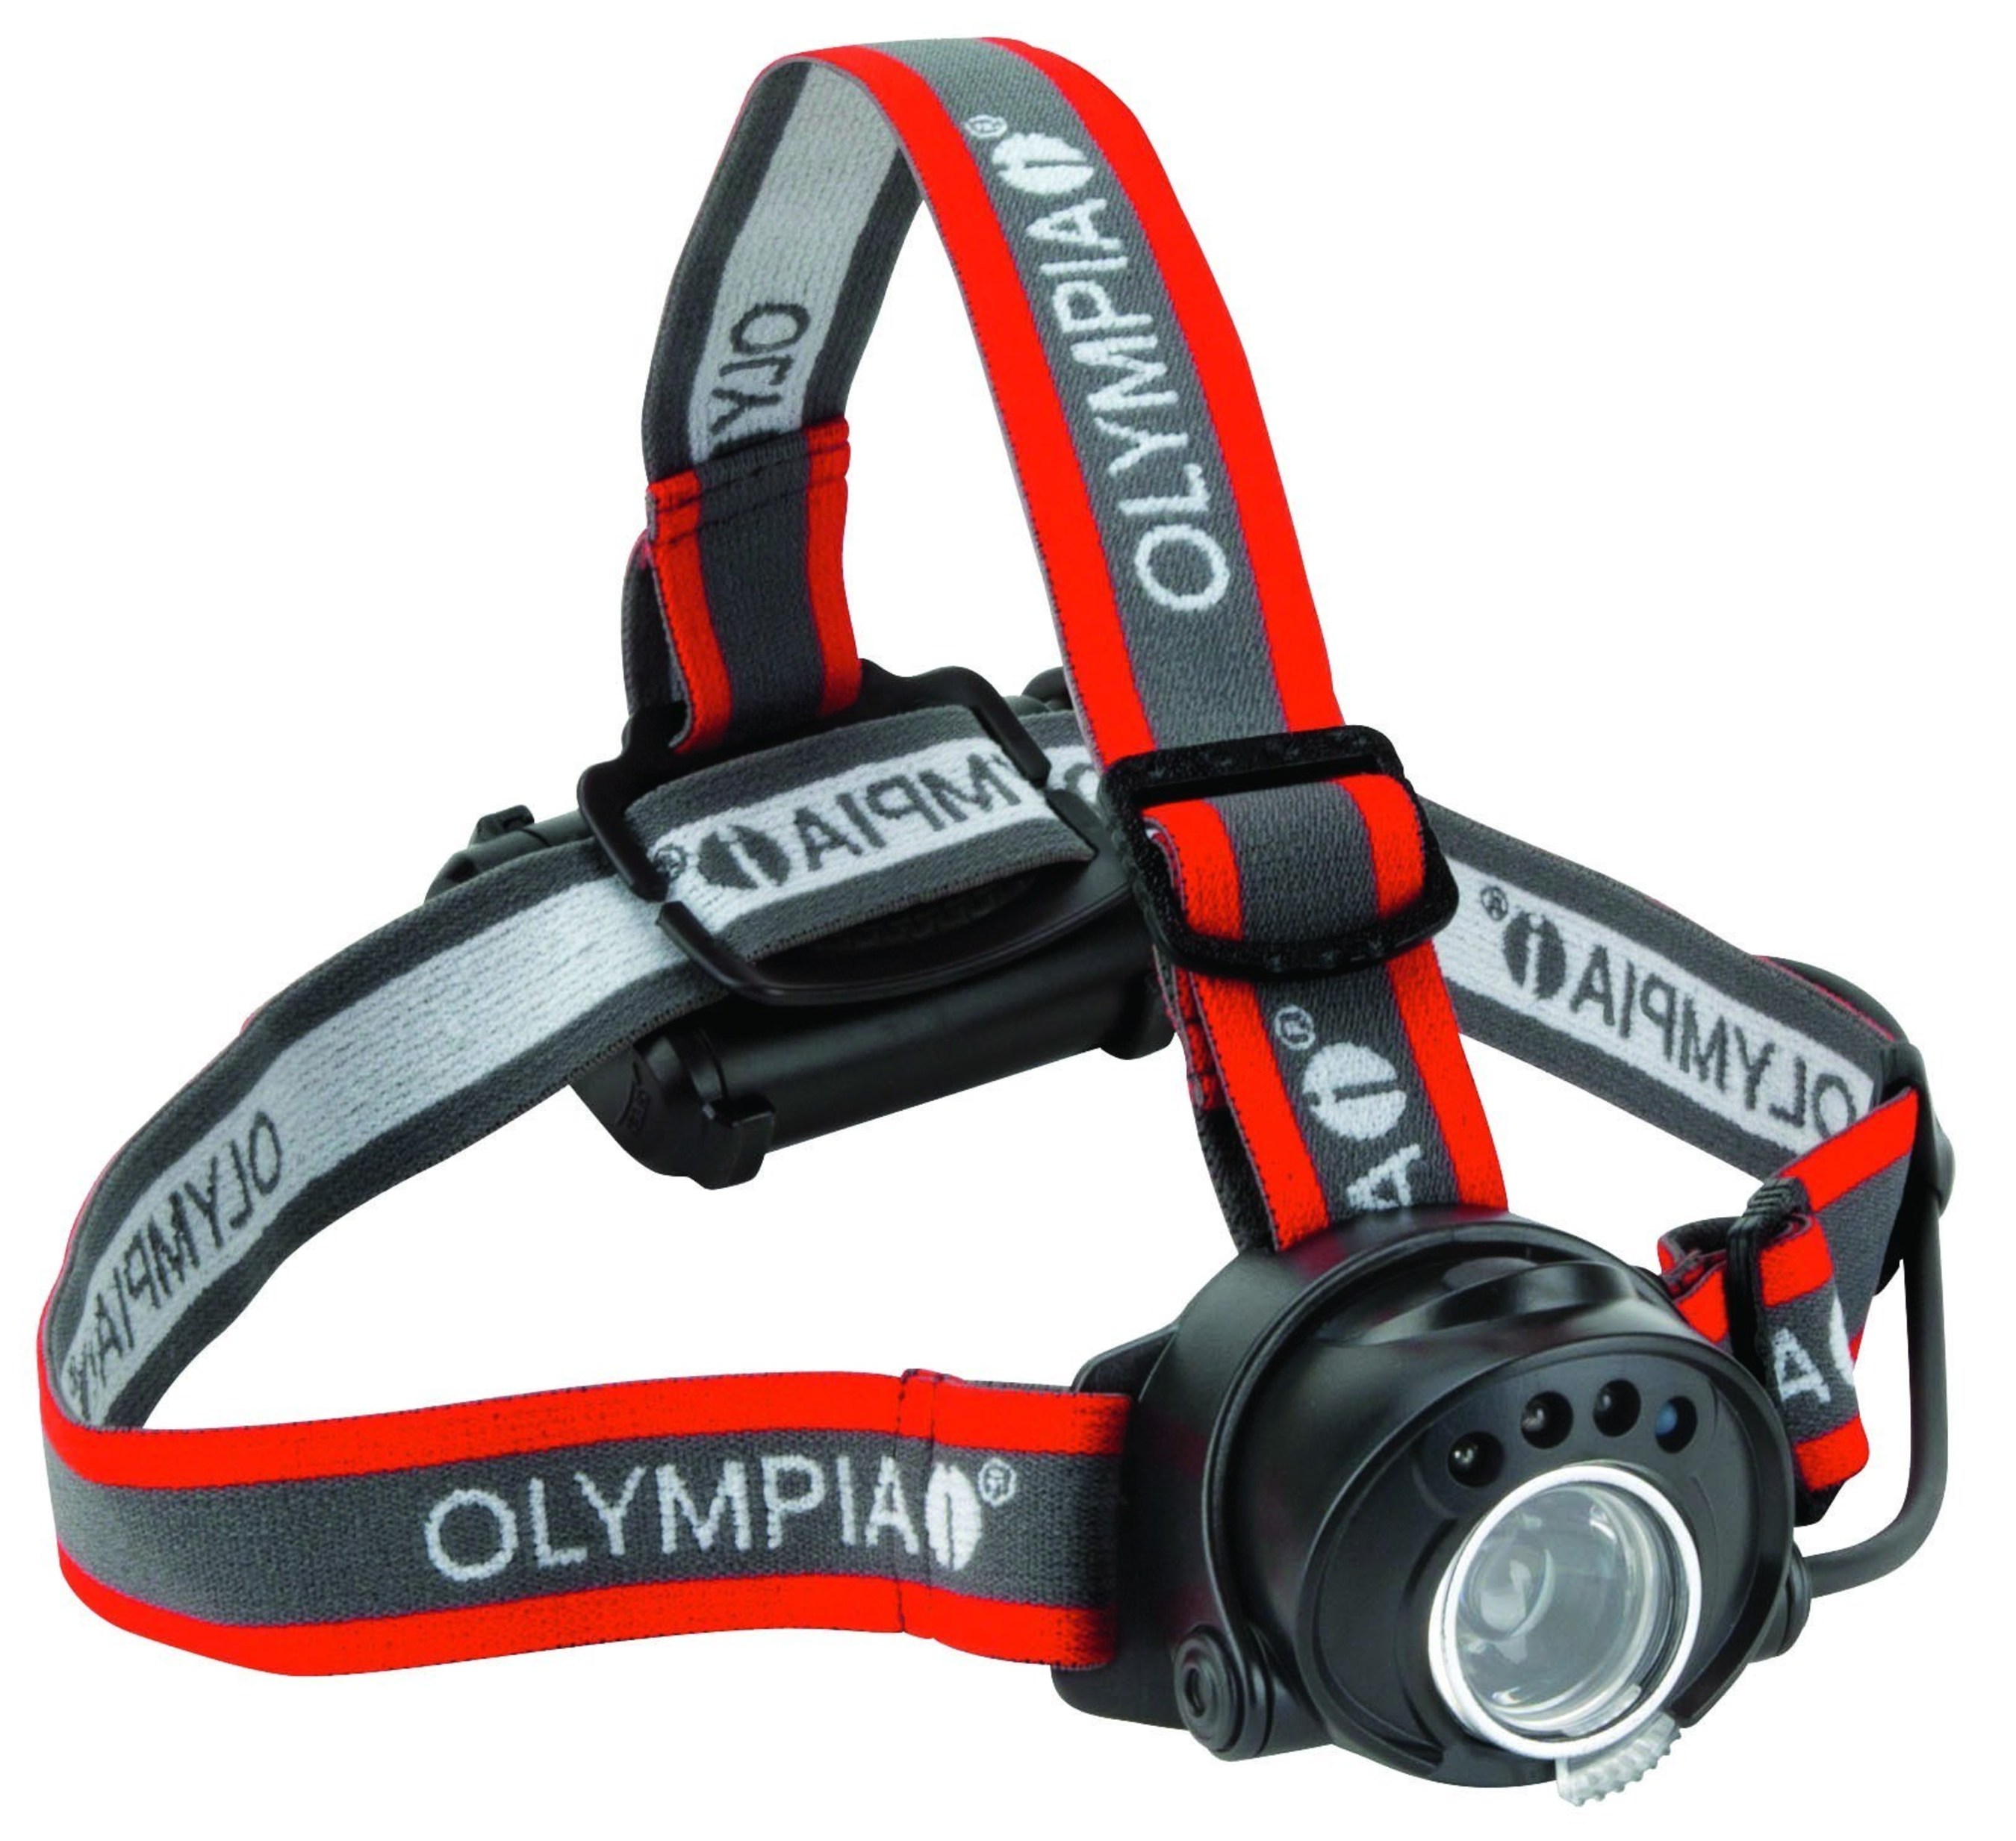 The Olympia(R) EX100 Headlamp is one of the high performance outdoor lighting products showcased at the 2015 SHOT show.  www.OlympiaOutdoors.com.